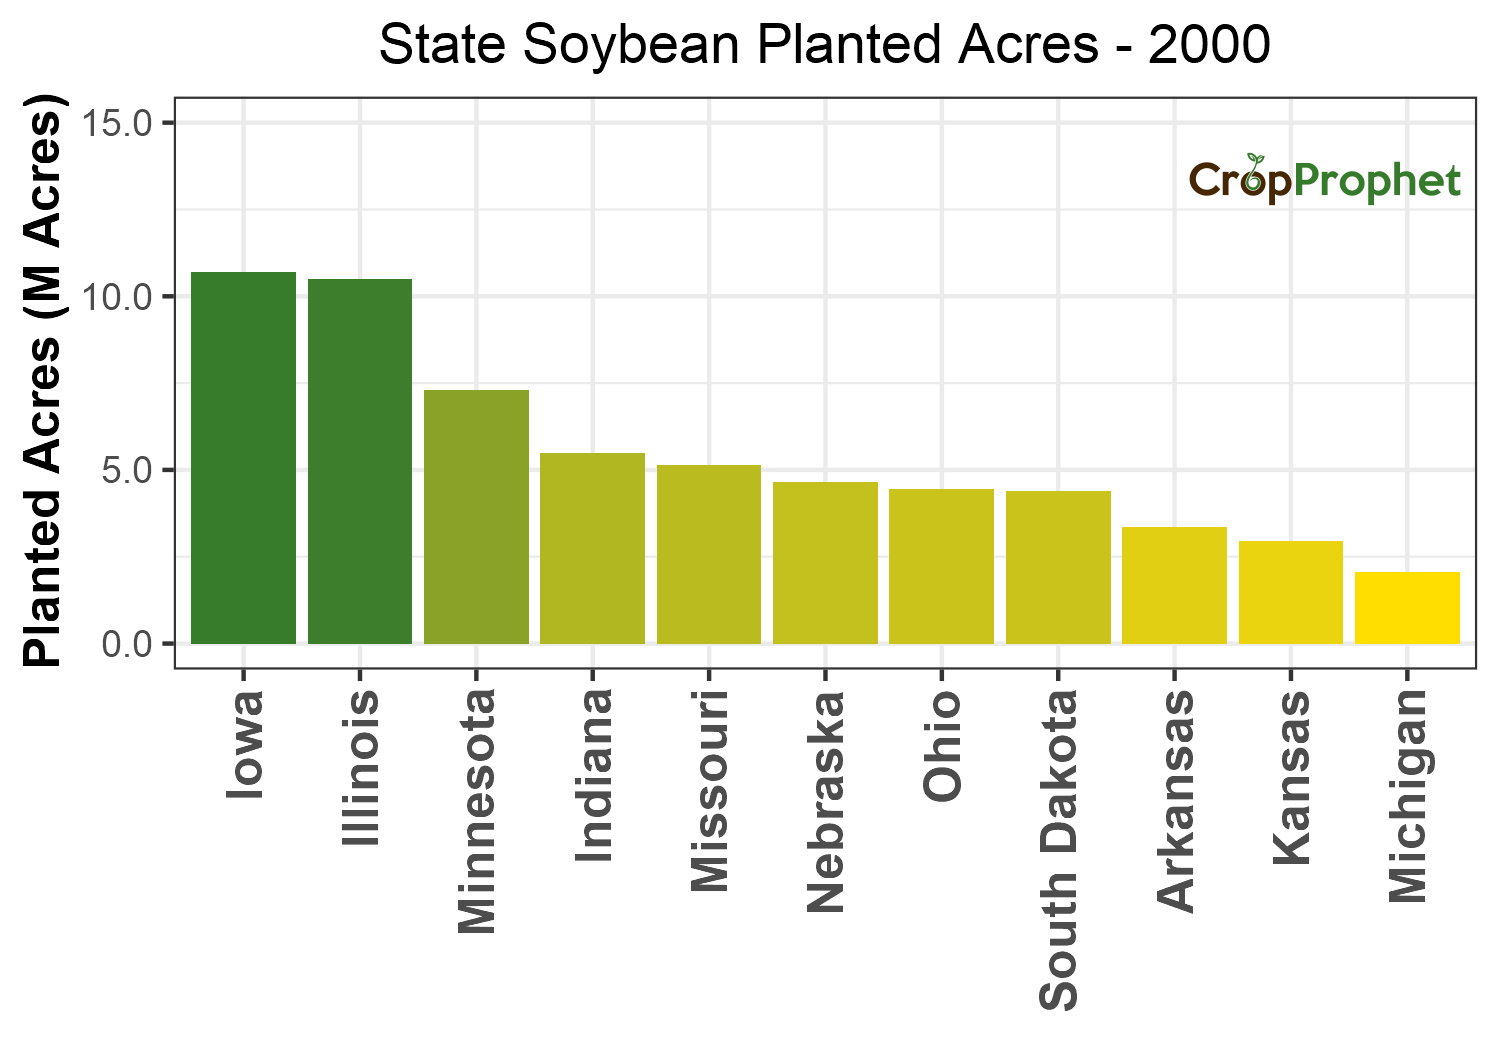 Soybean Production by State - 2000 Rankings